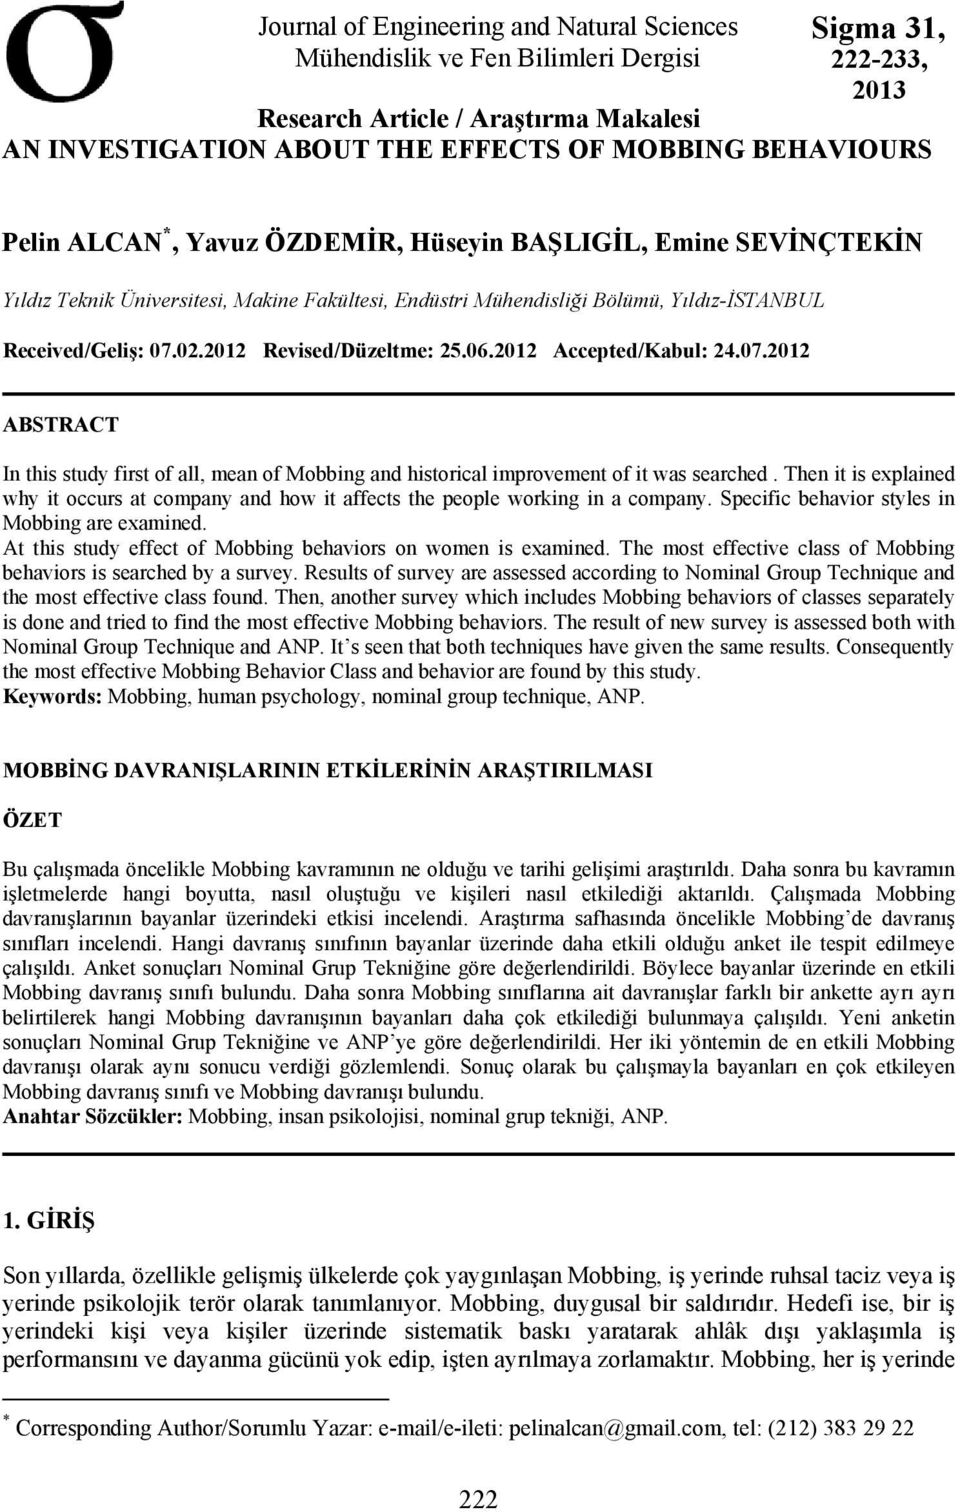 2012 Revised/Düzeltme: 25.06.2012 Accepted/Kabul: 24.07.2012 ABSTRACT In this study first of all, mean of Mobbing and historical improvement of it was searched.